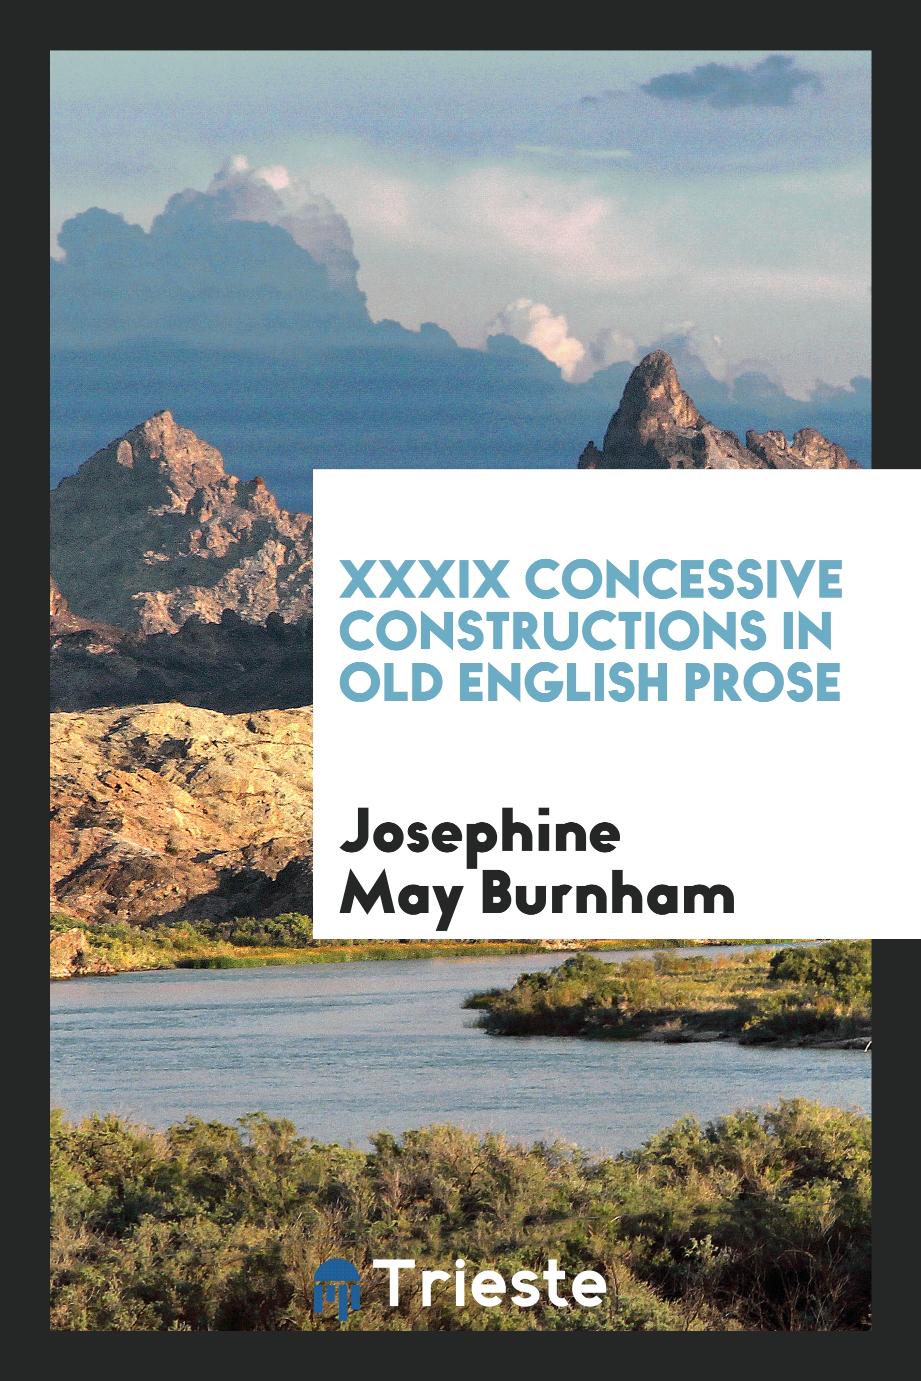 XXXIX Concessive Constructions in Old English Prose